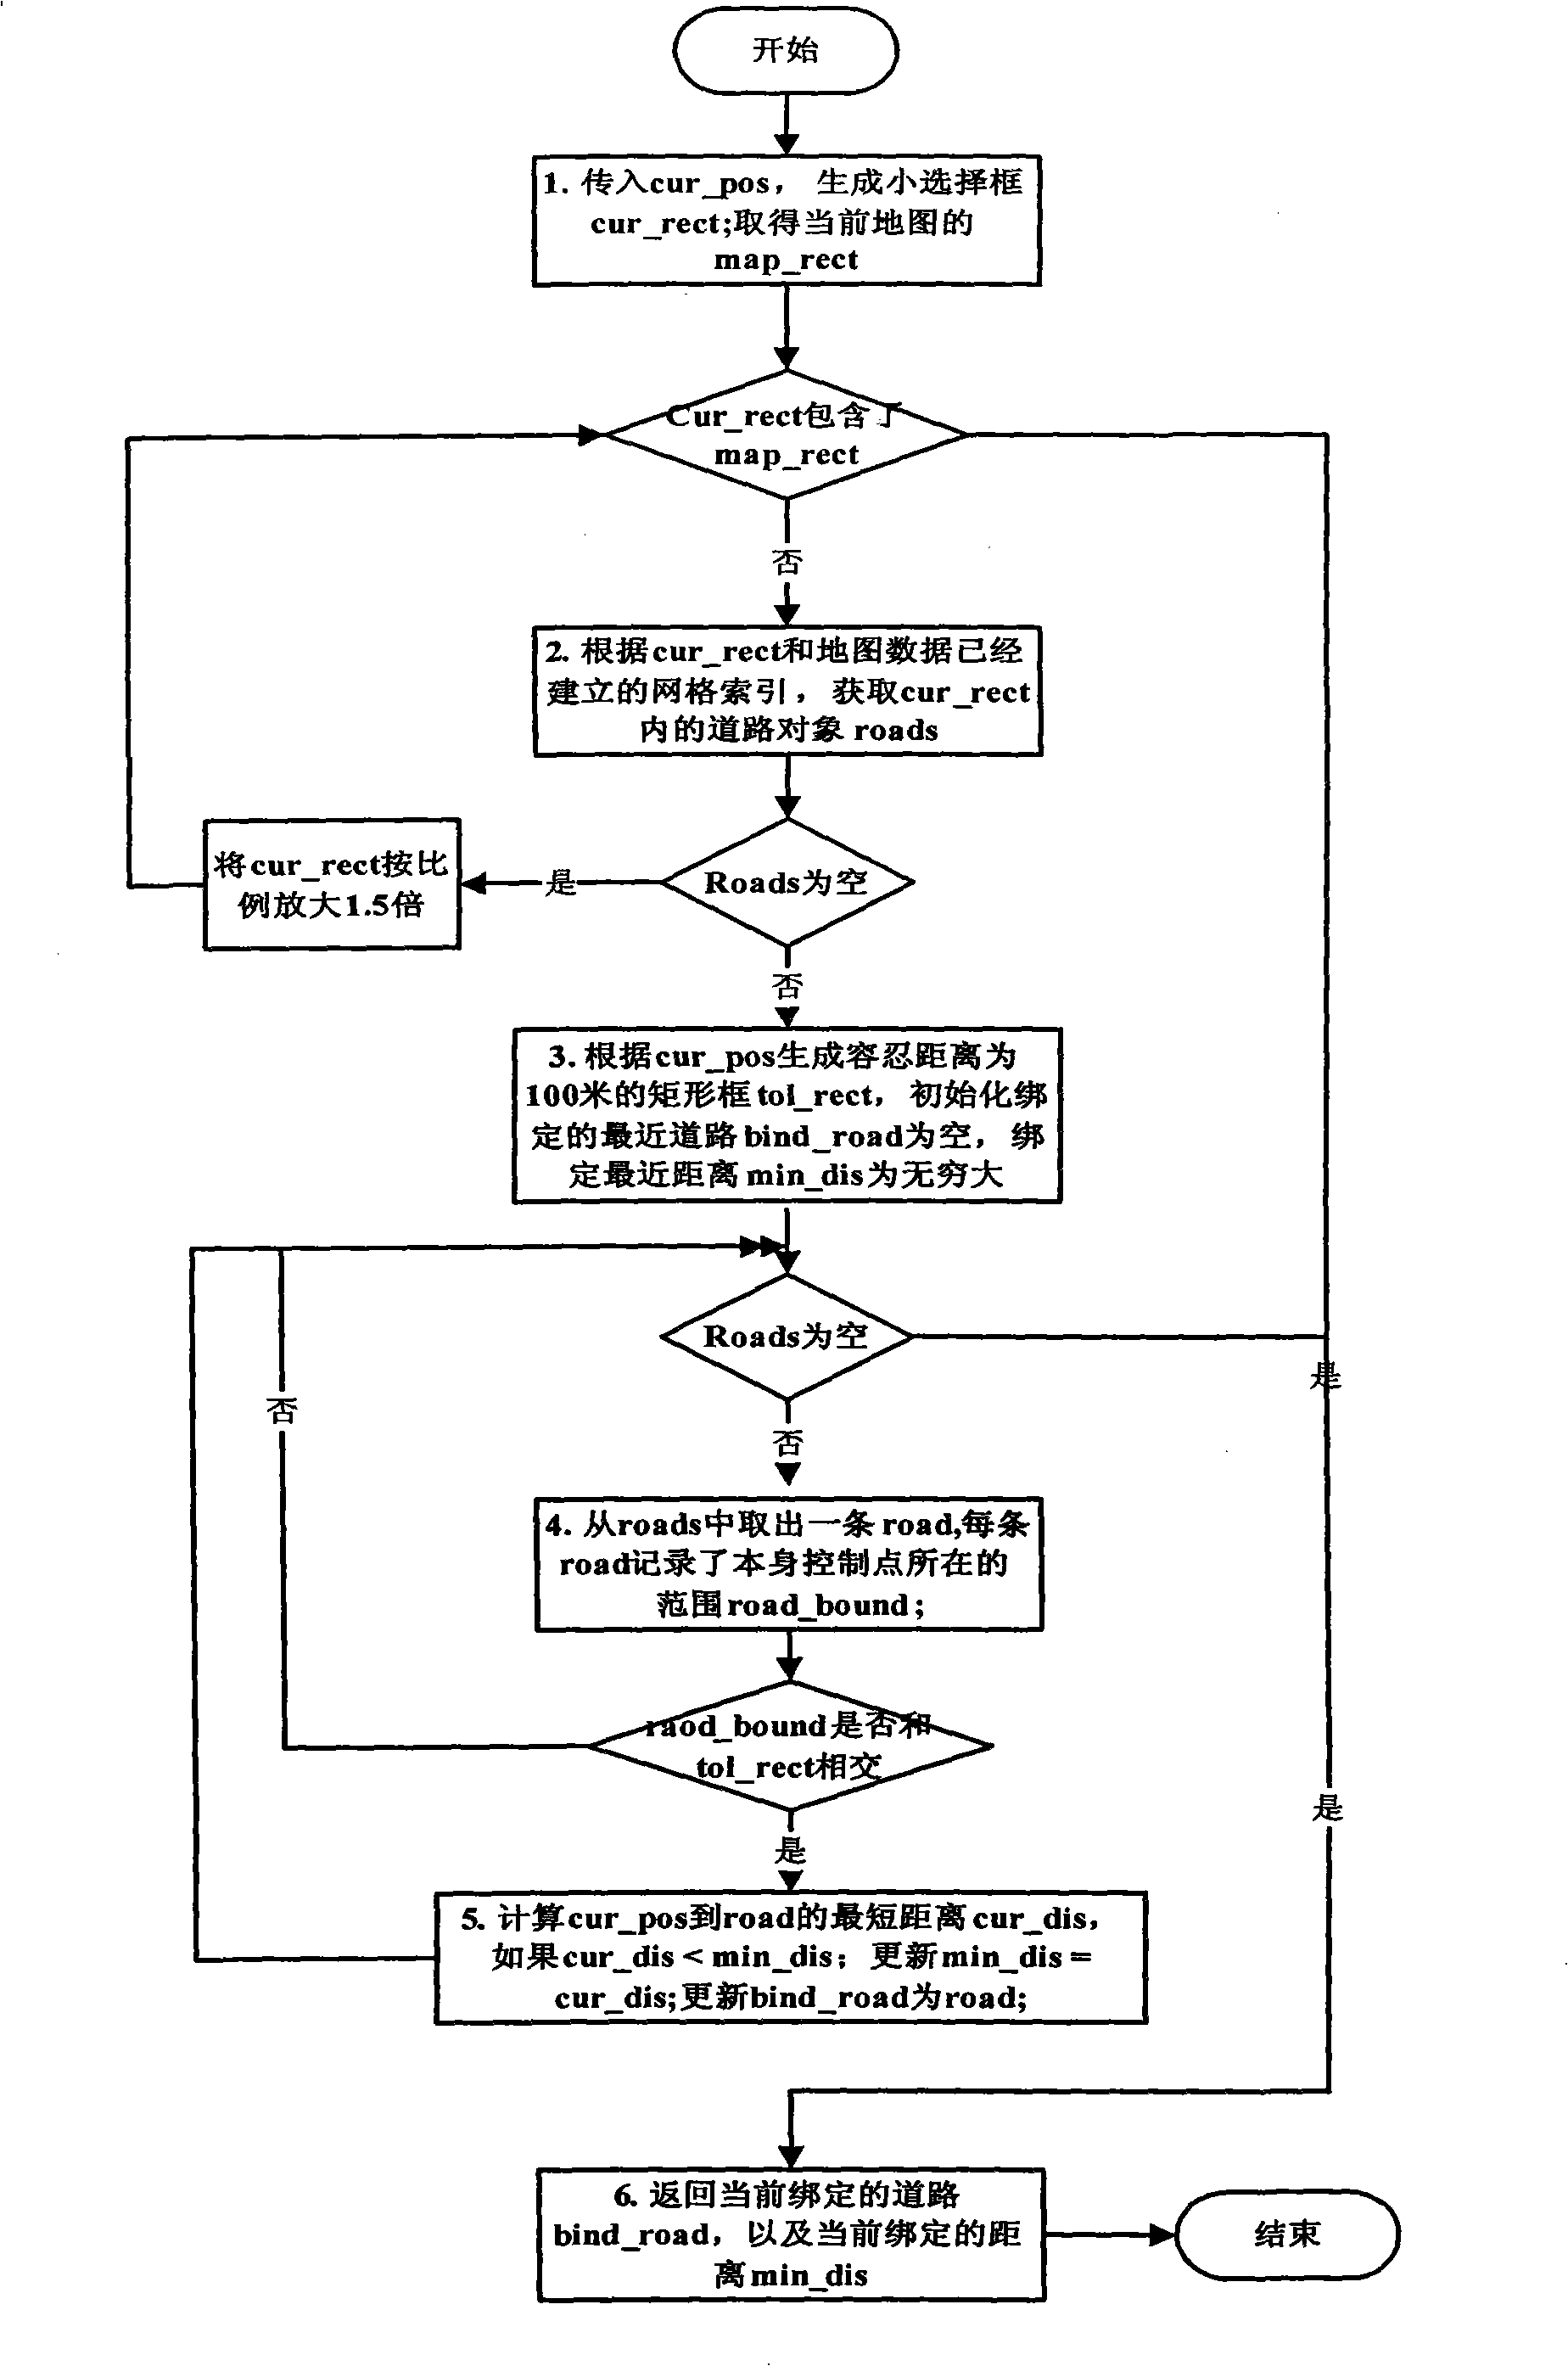 Route searching method based on mobile navigation system